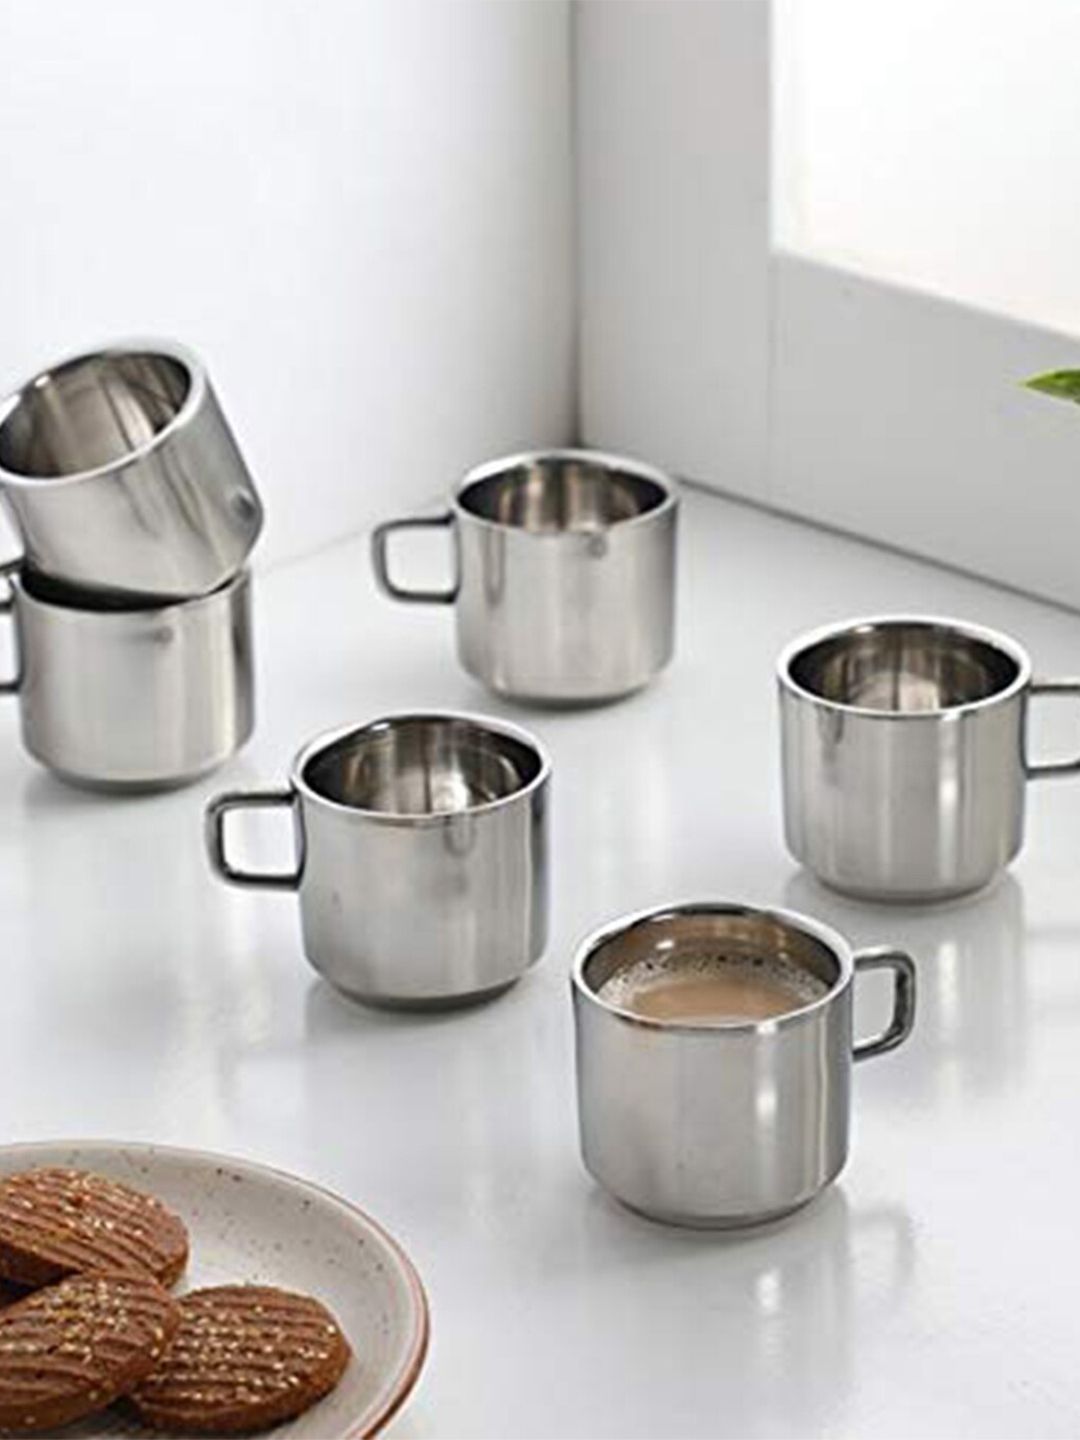 MARKET99 Unisex Silver Set Of 6 Pcs Cups and Mugs Price in India